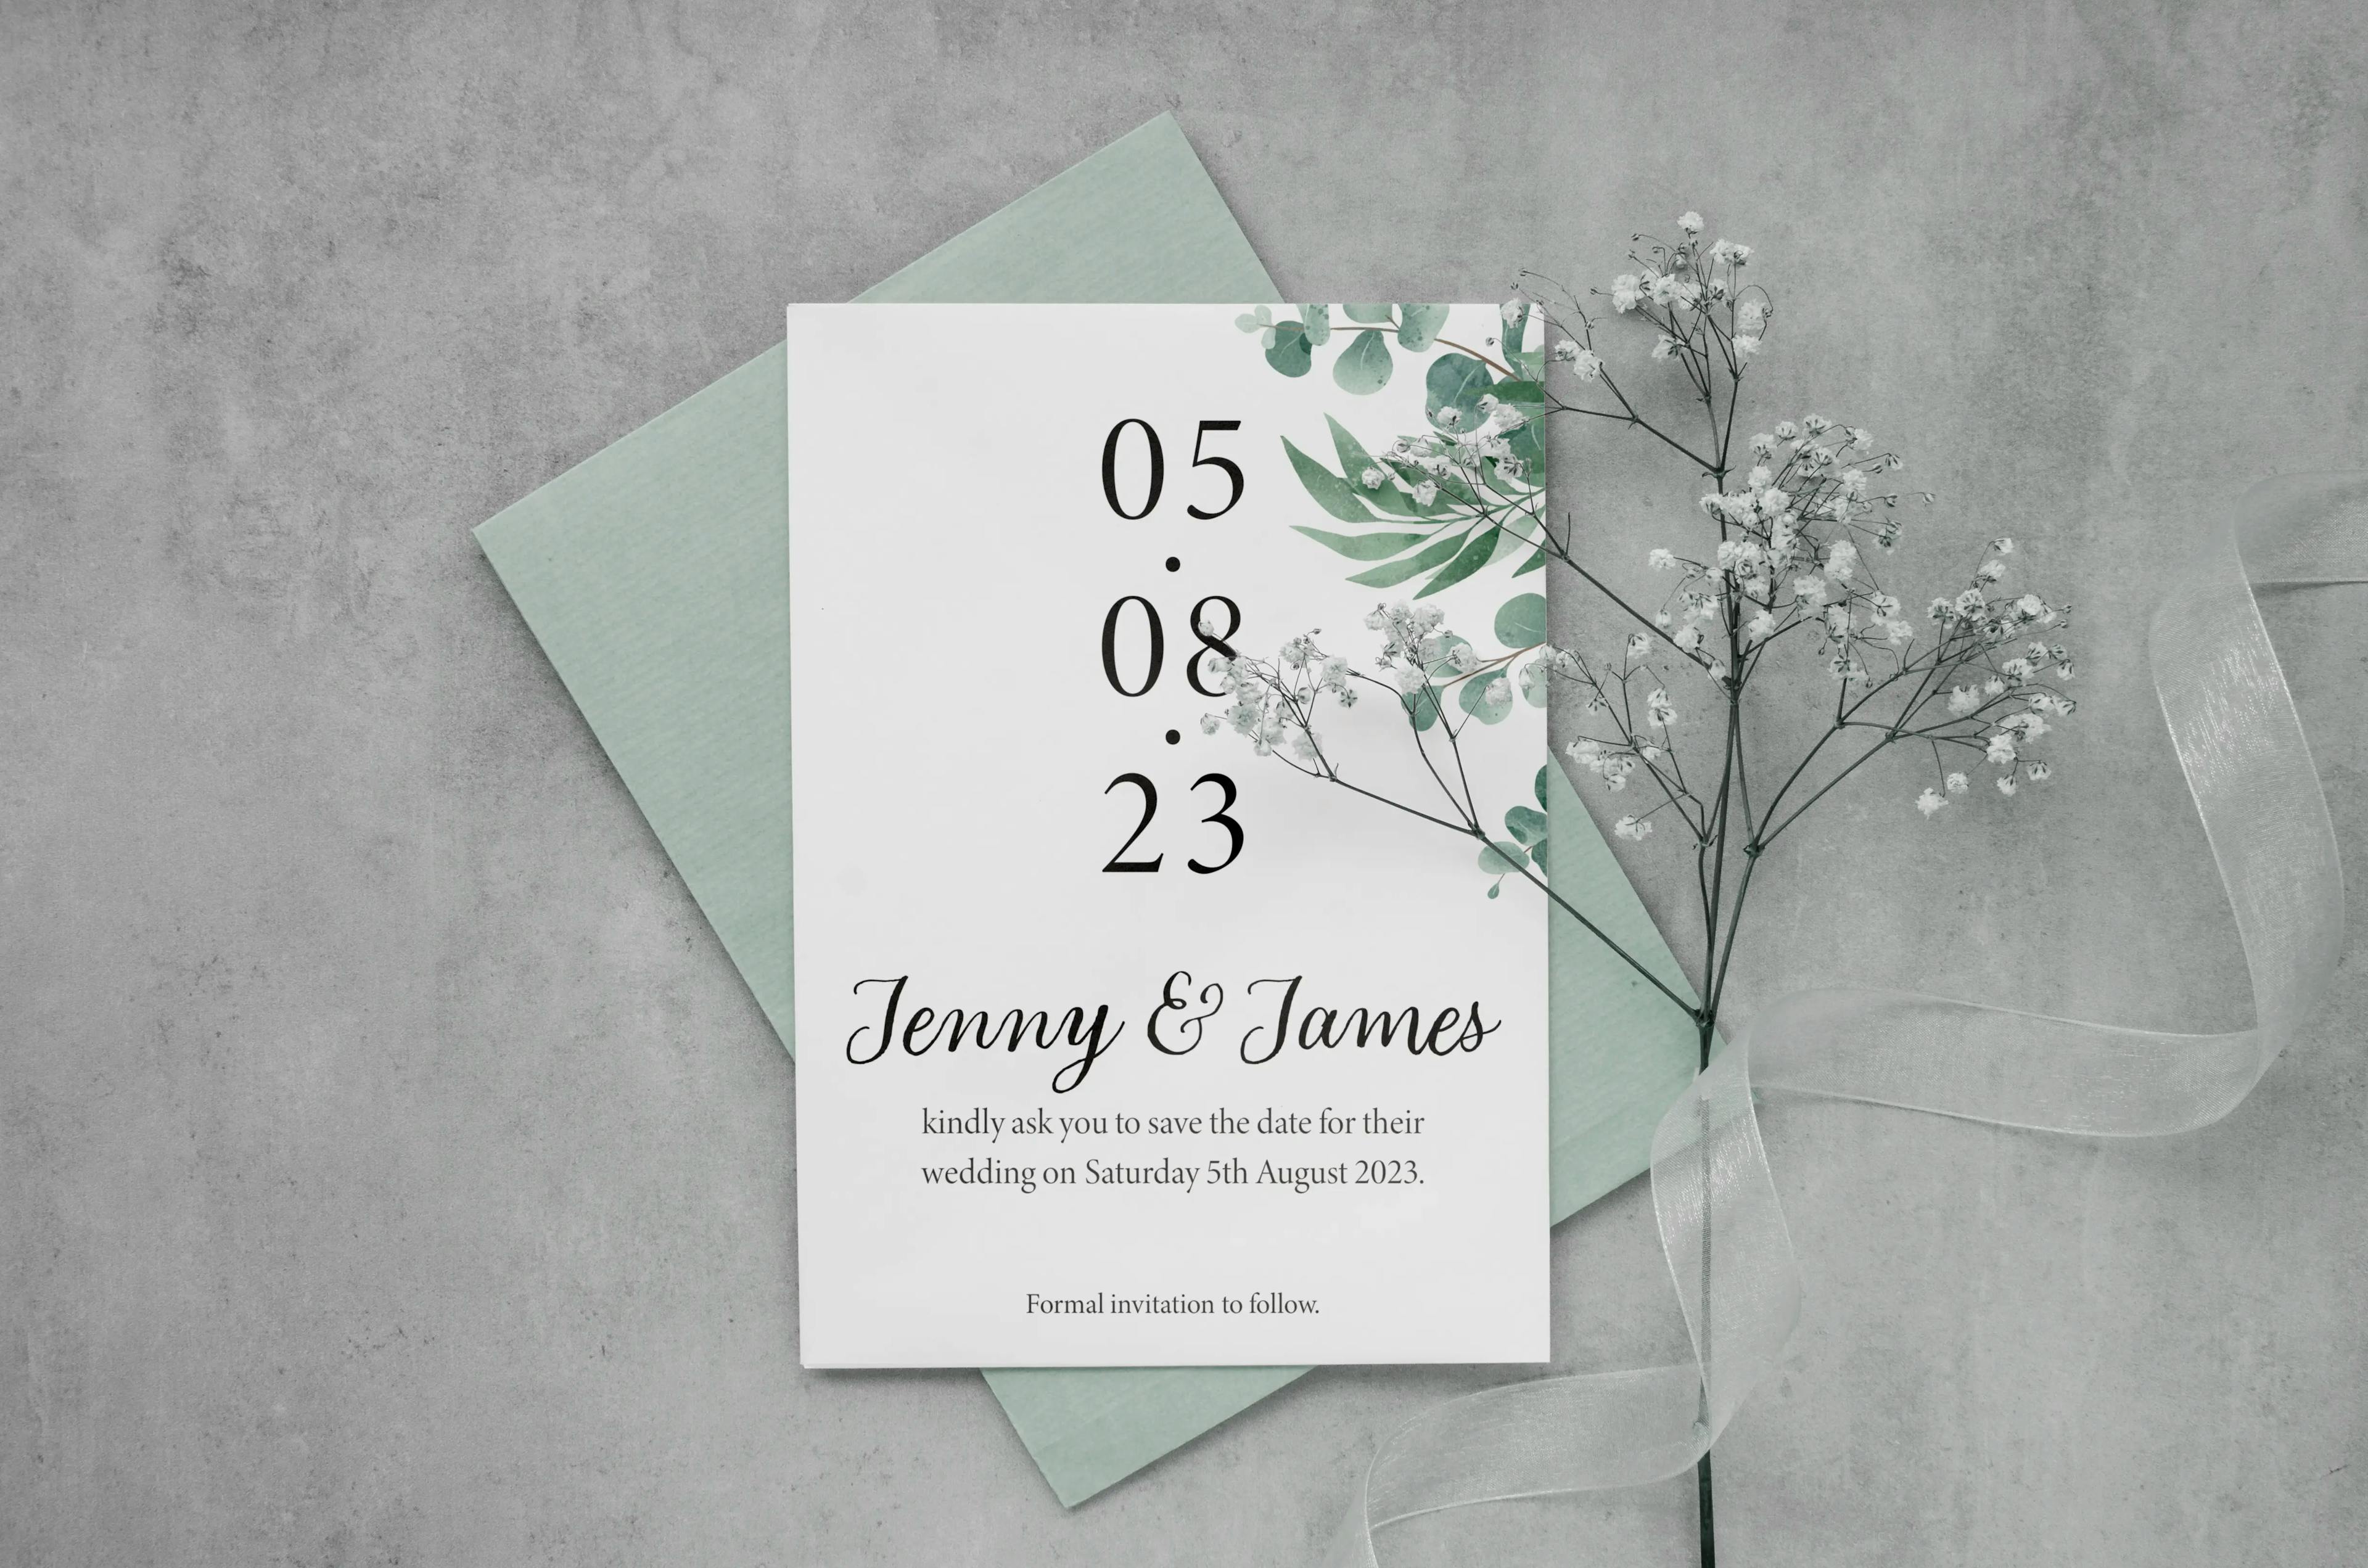 Jenny & James Save the Date printed